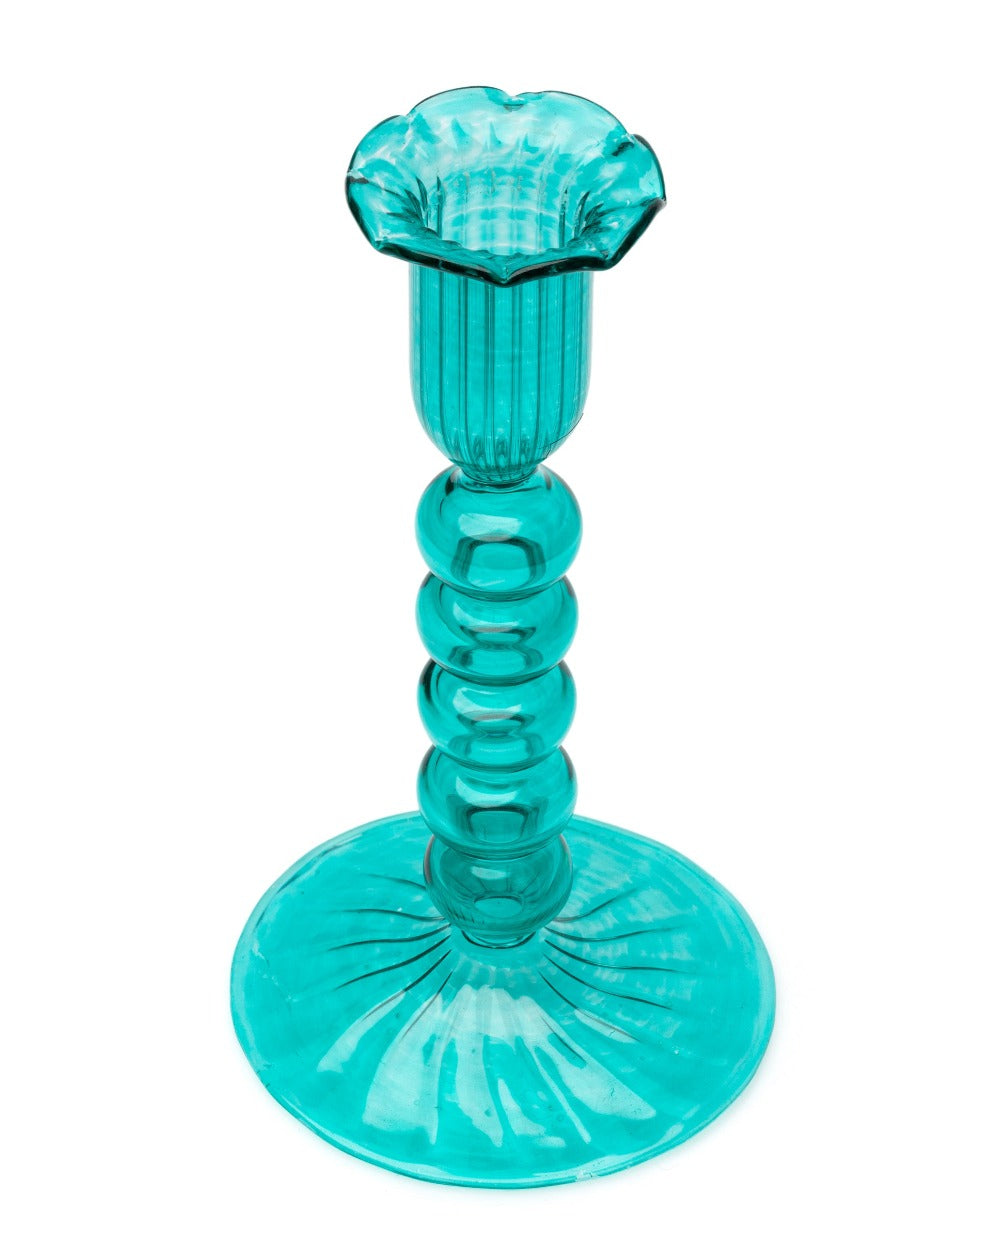 Studio Dine Store Turquoise Glass Candle Holder